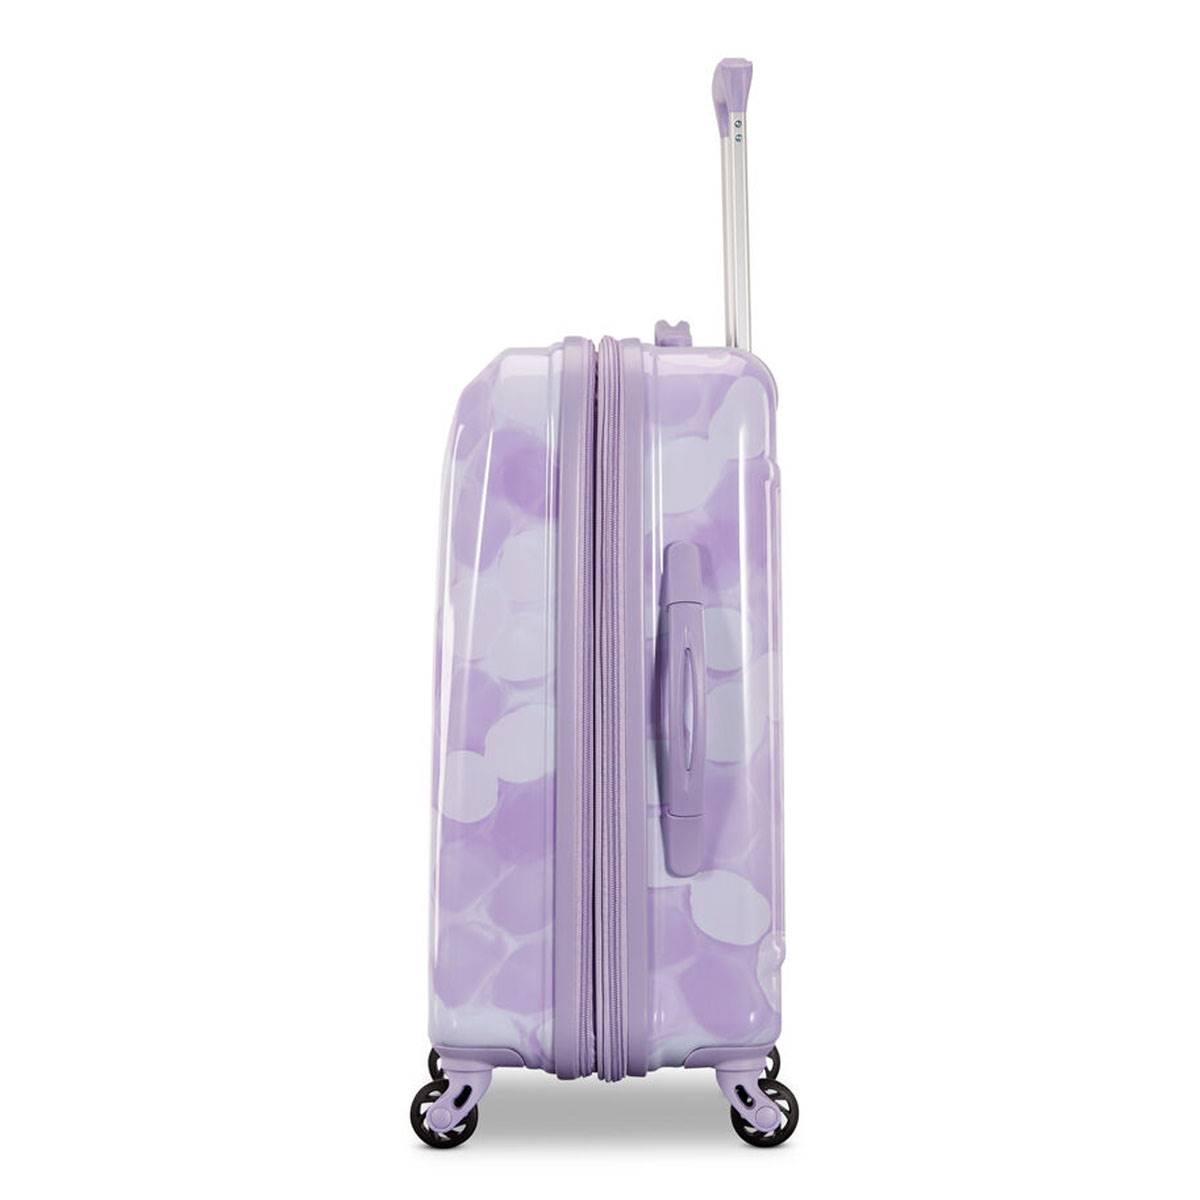 American Tourister Moonlight 25in. Spinner Luggage